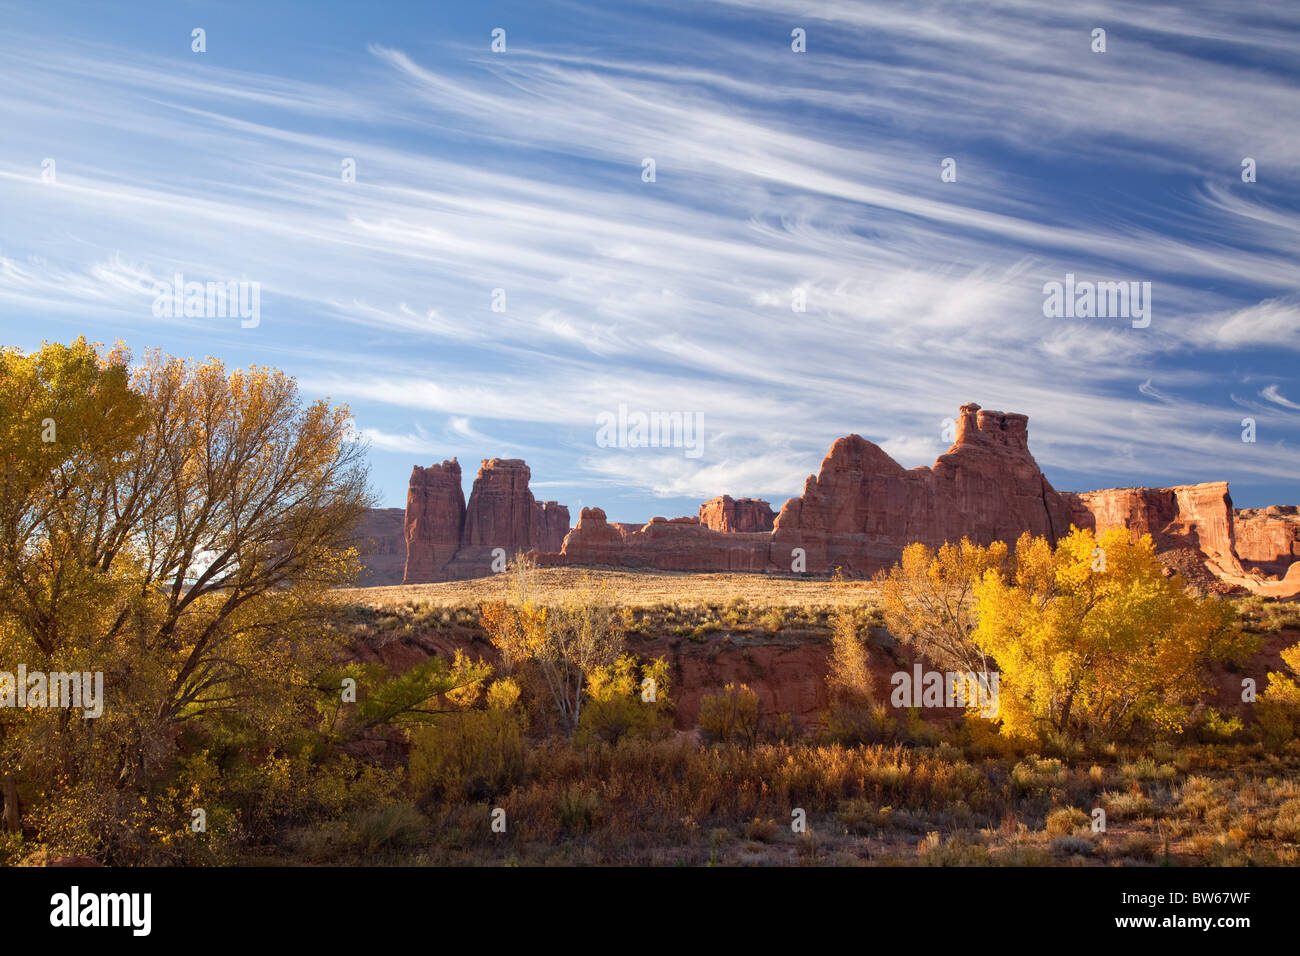 Courthouse Wash and Courthouse Towers, Arches National Park, Utah Stock Photo